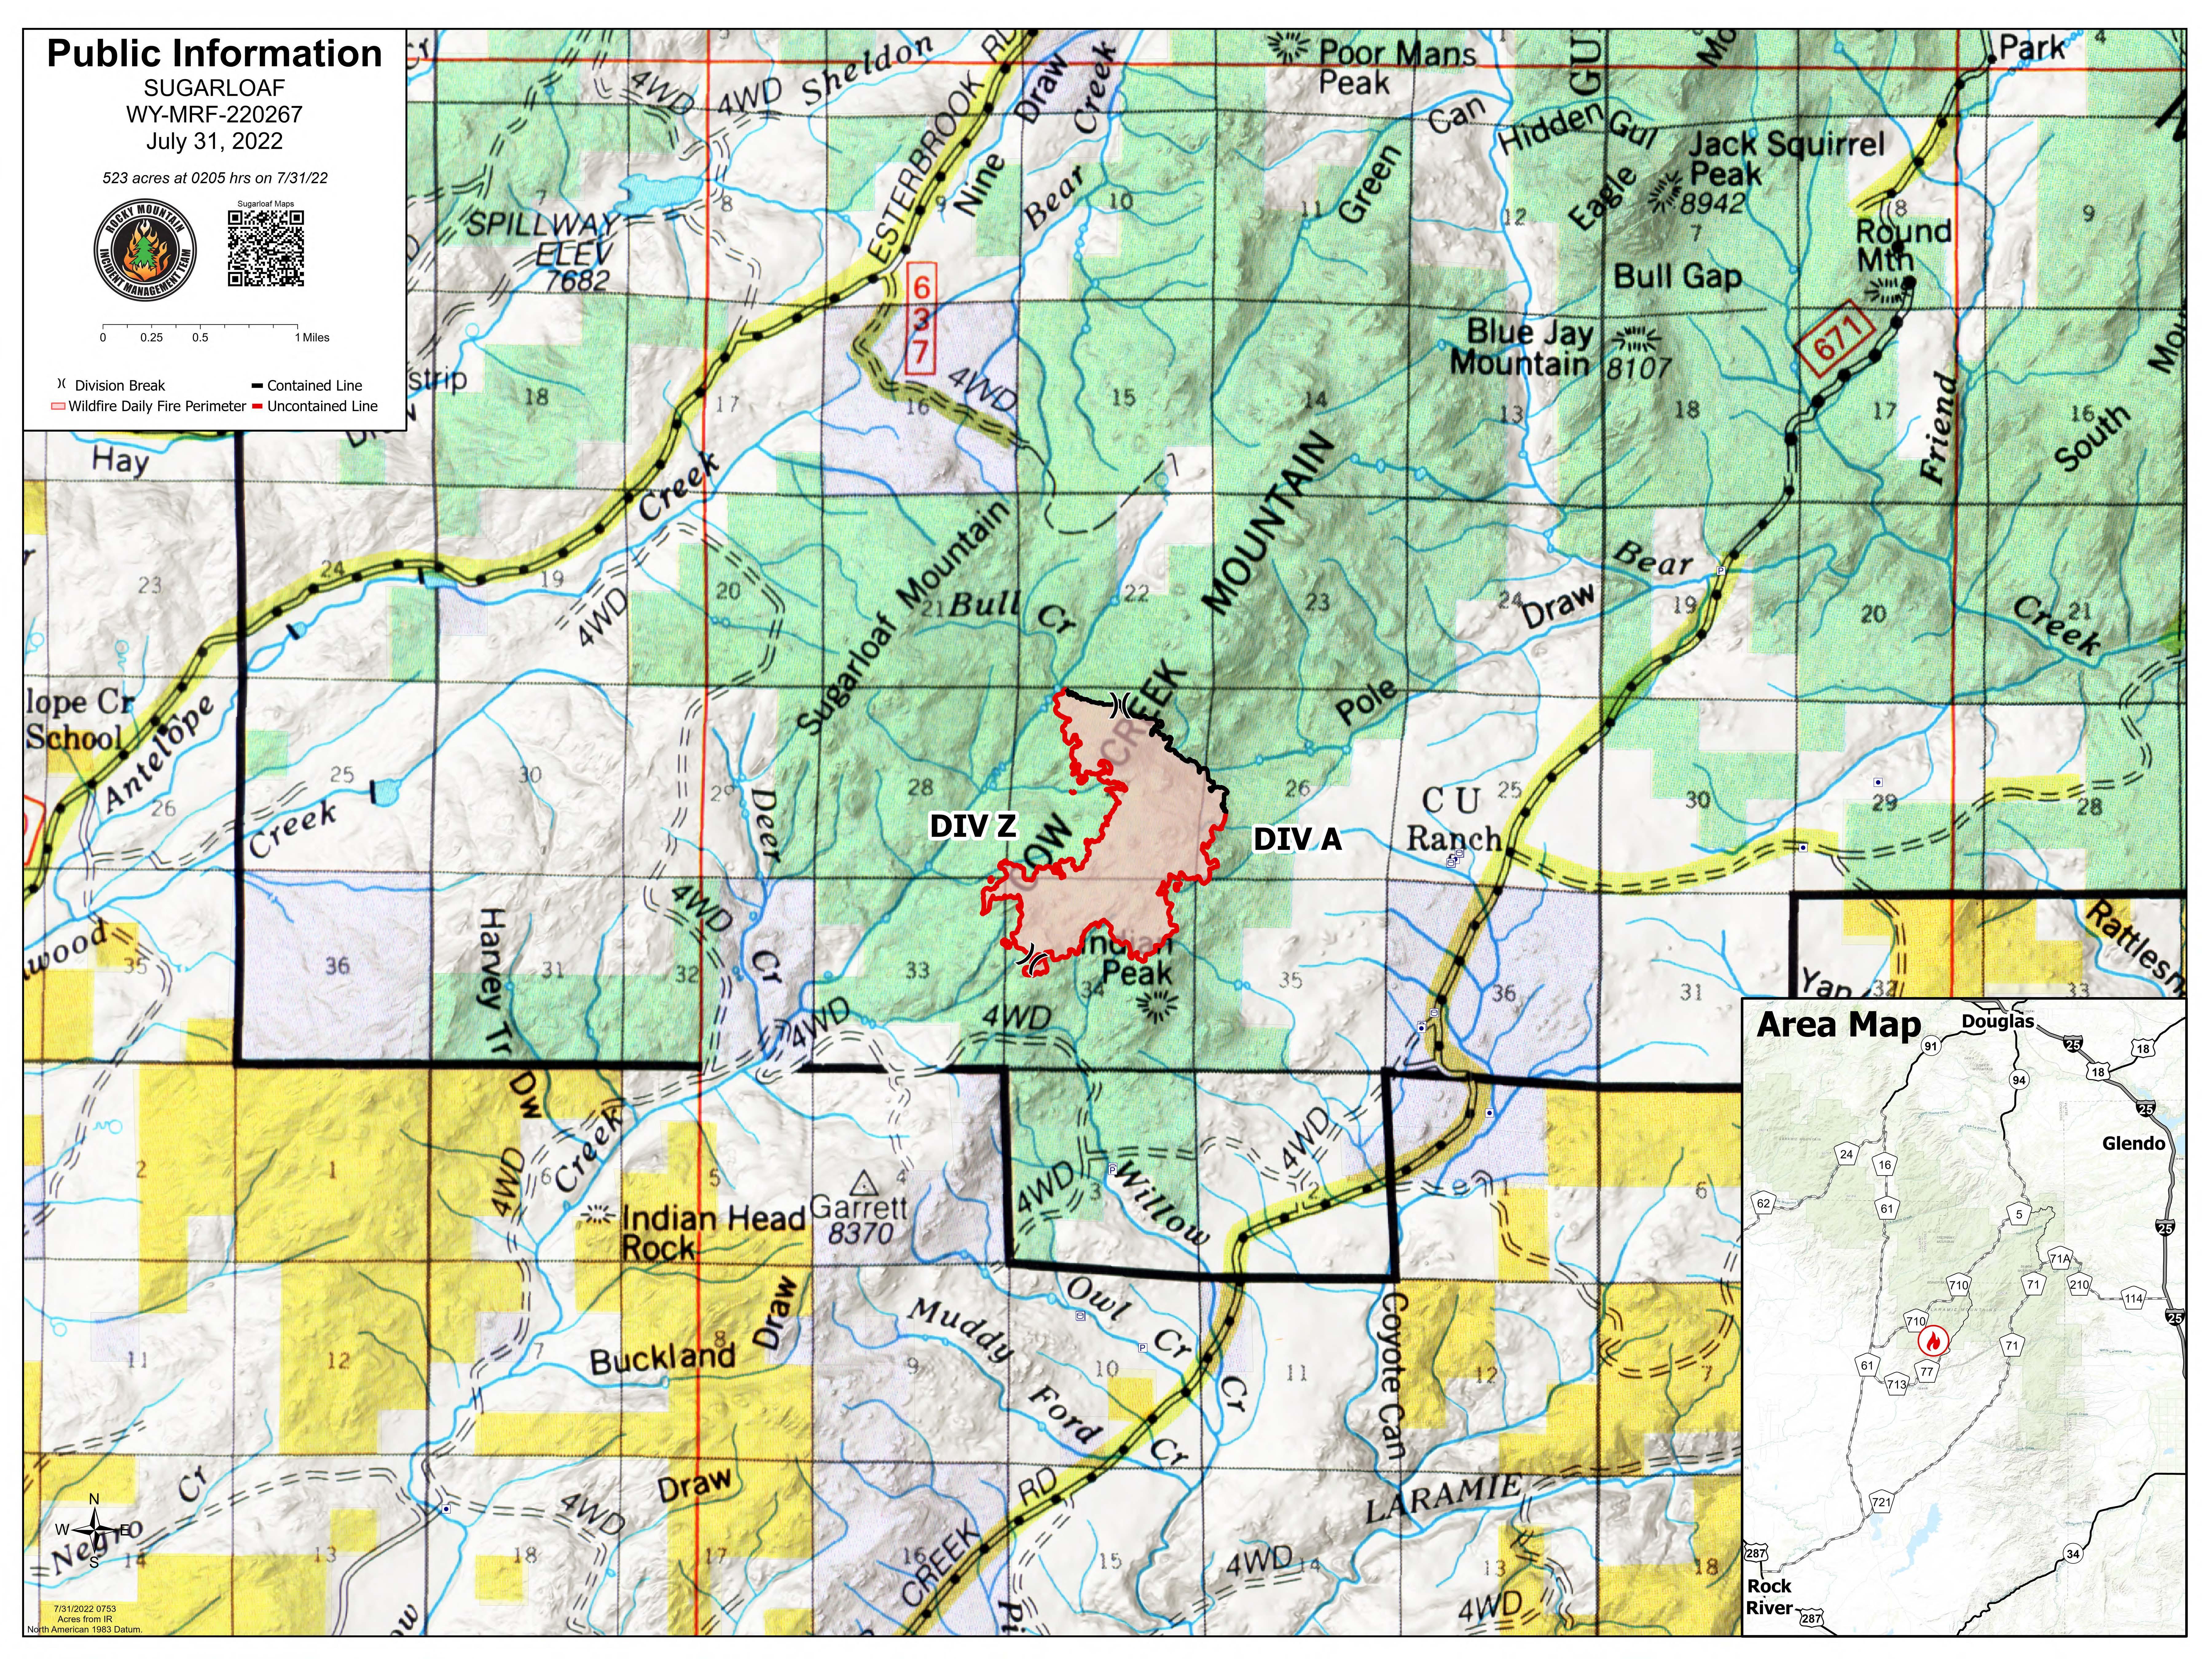 Sugarloaf Fire Public Information Map for July 31